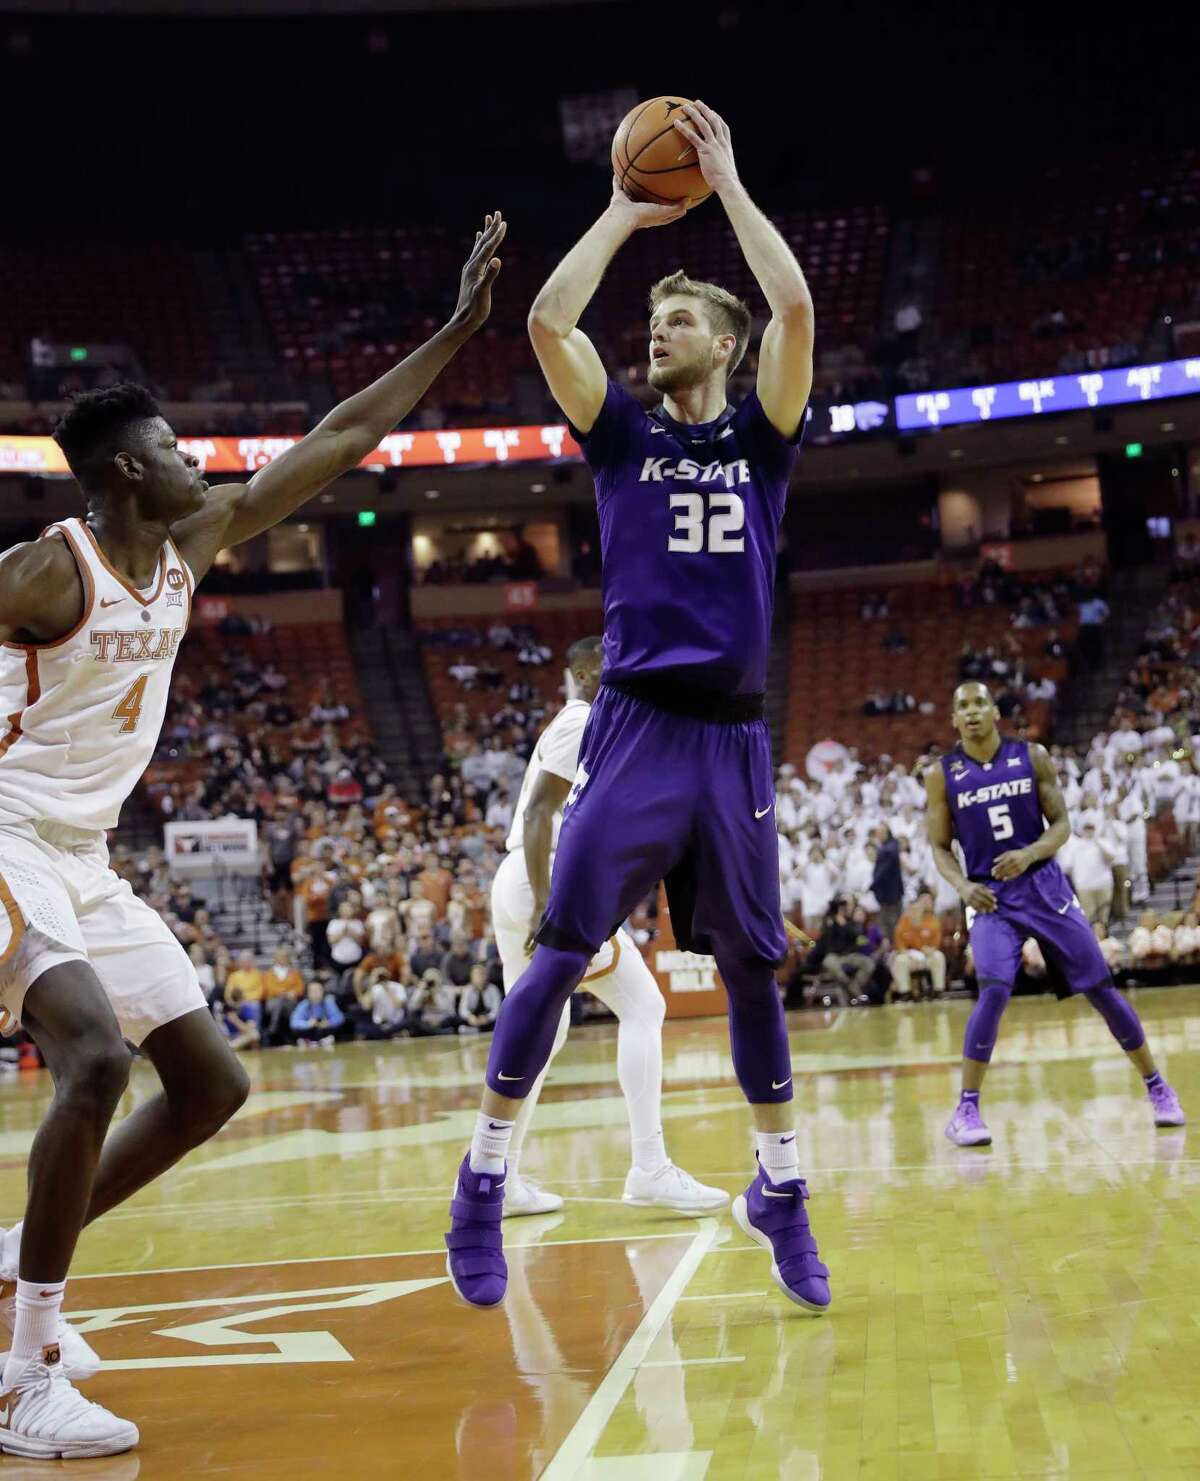 Kansas State forward Dean Wade (32) shoots over Texas forward Mohamed Bamba (4) during the first half of an NCAA college basketball game Wednesday, Feb. 7, 2018, in Austin, Texas. (AP Photo/Eric Gay)